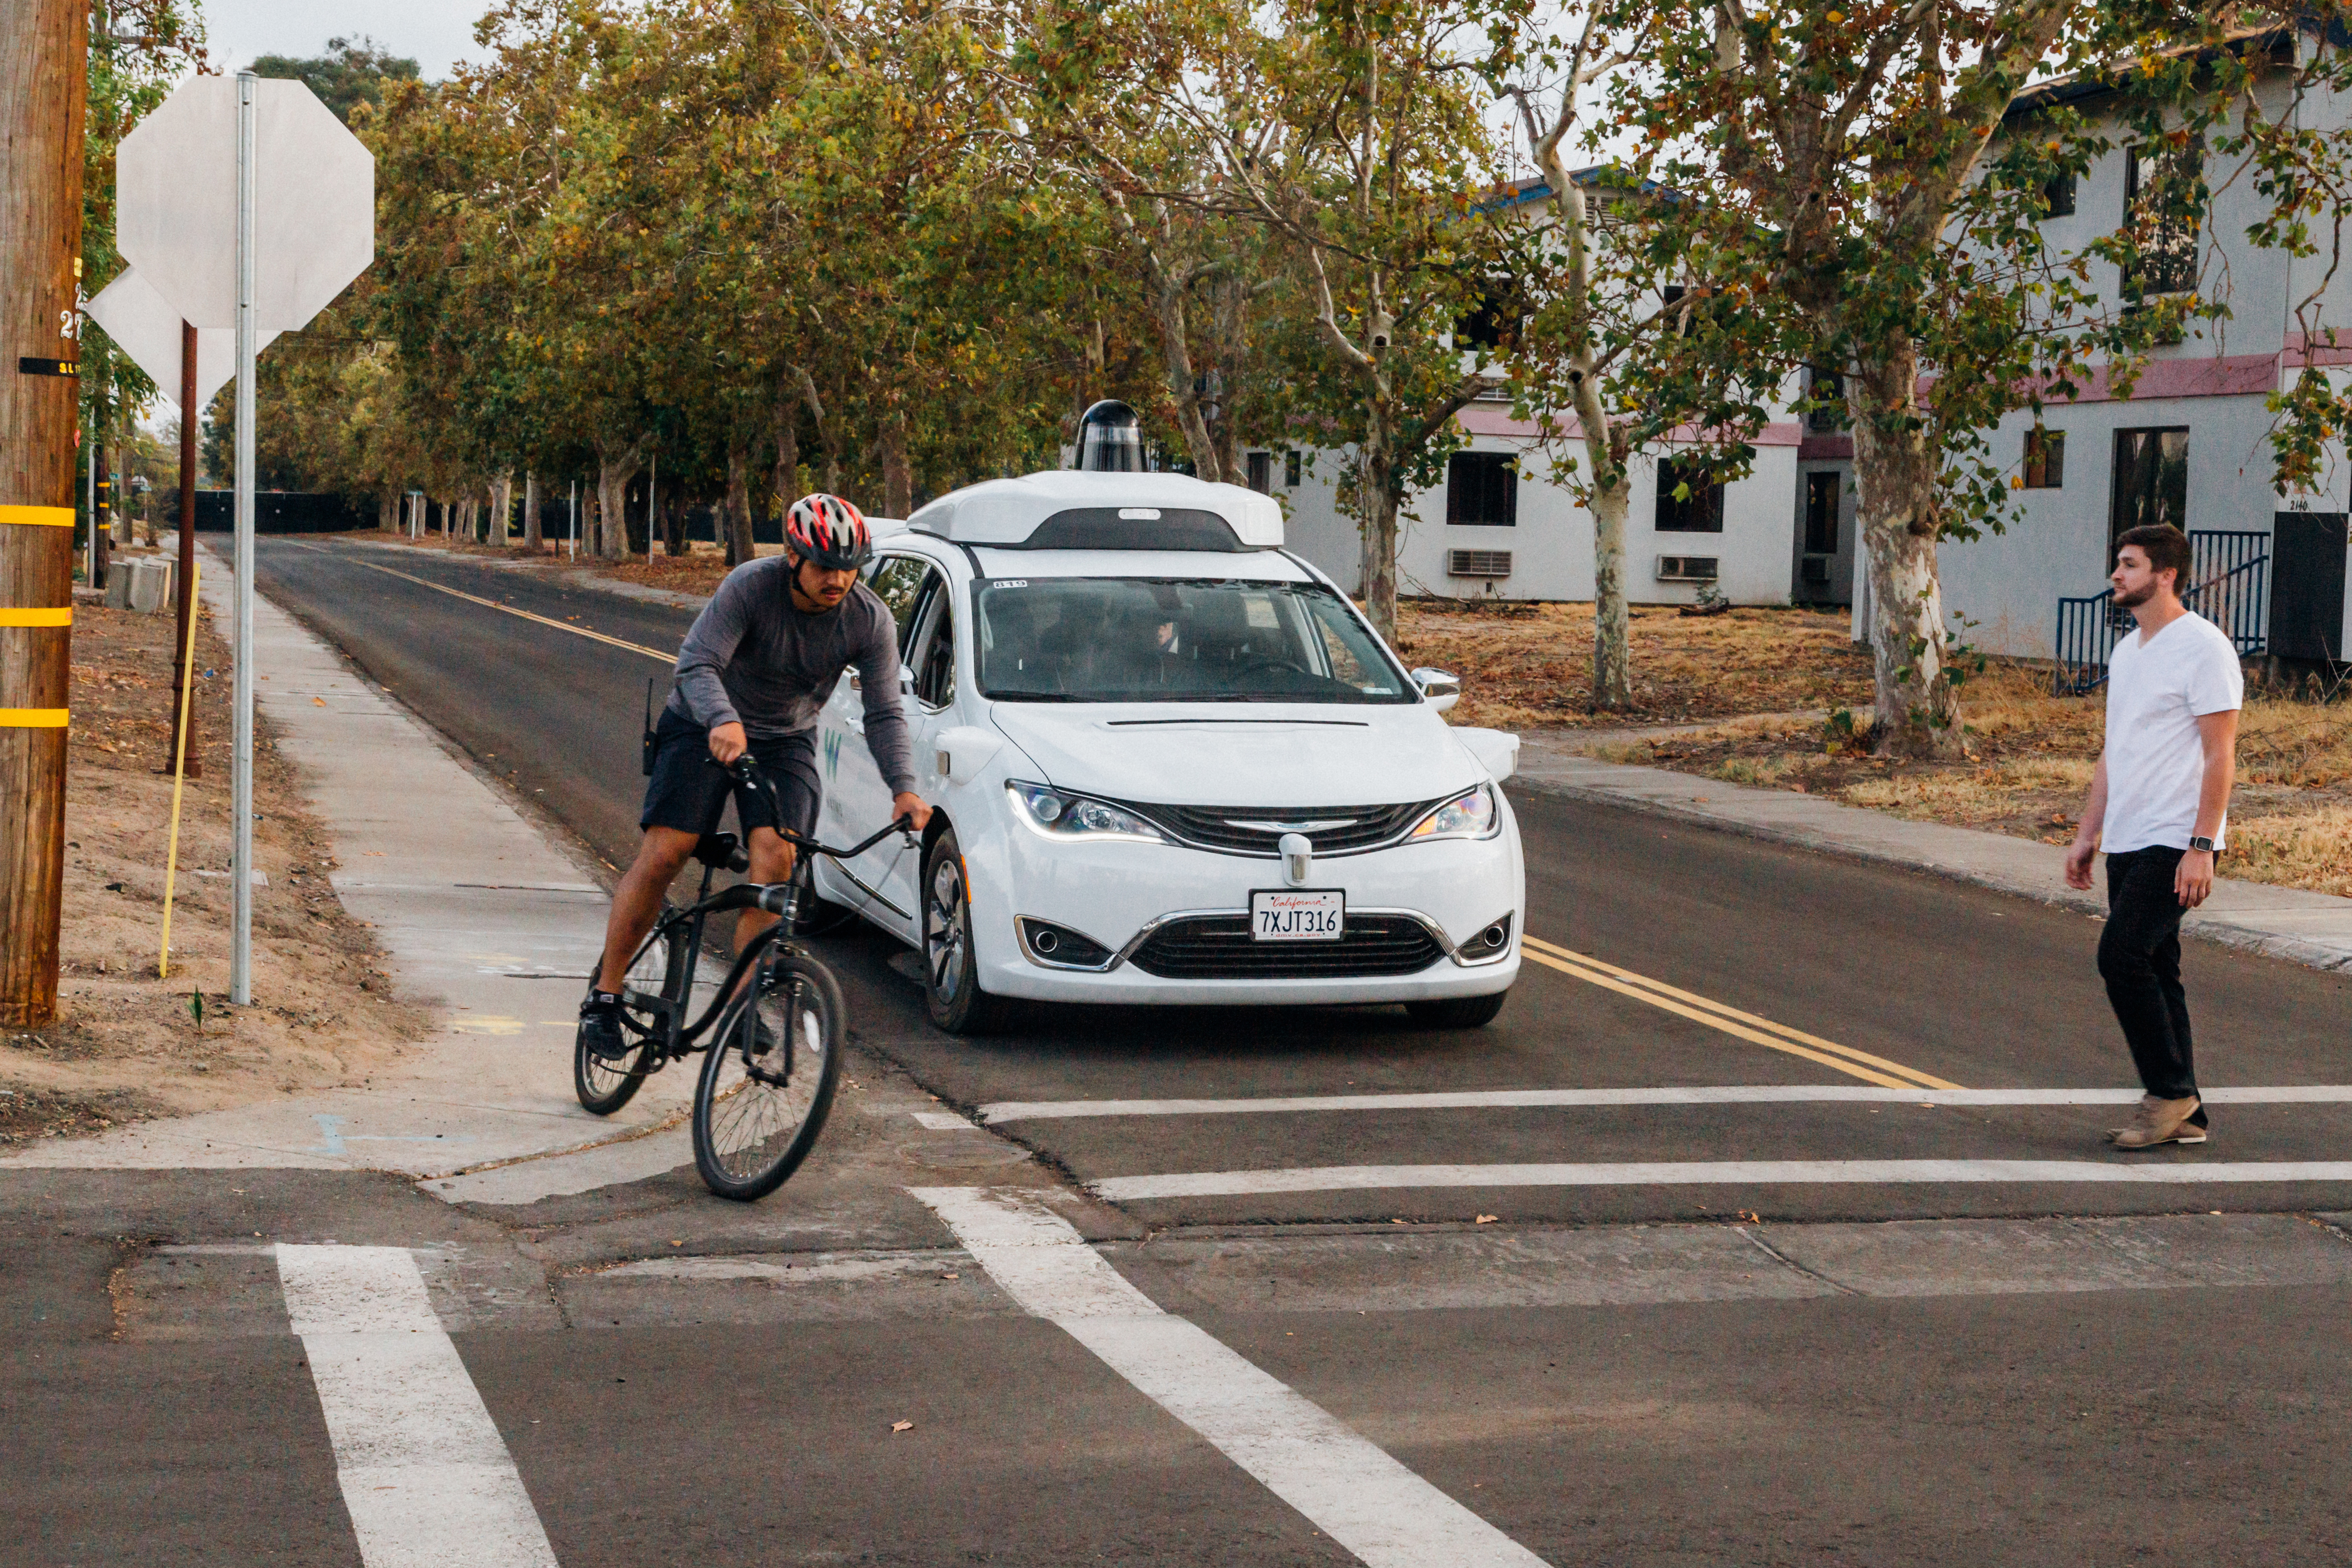 Waymo vehicle stopped for pedestrians